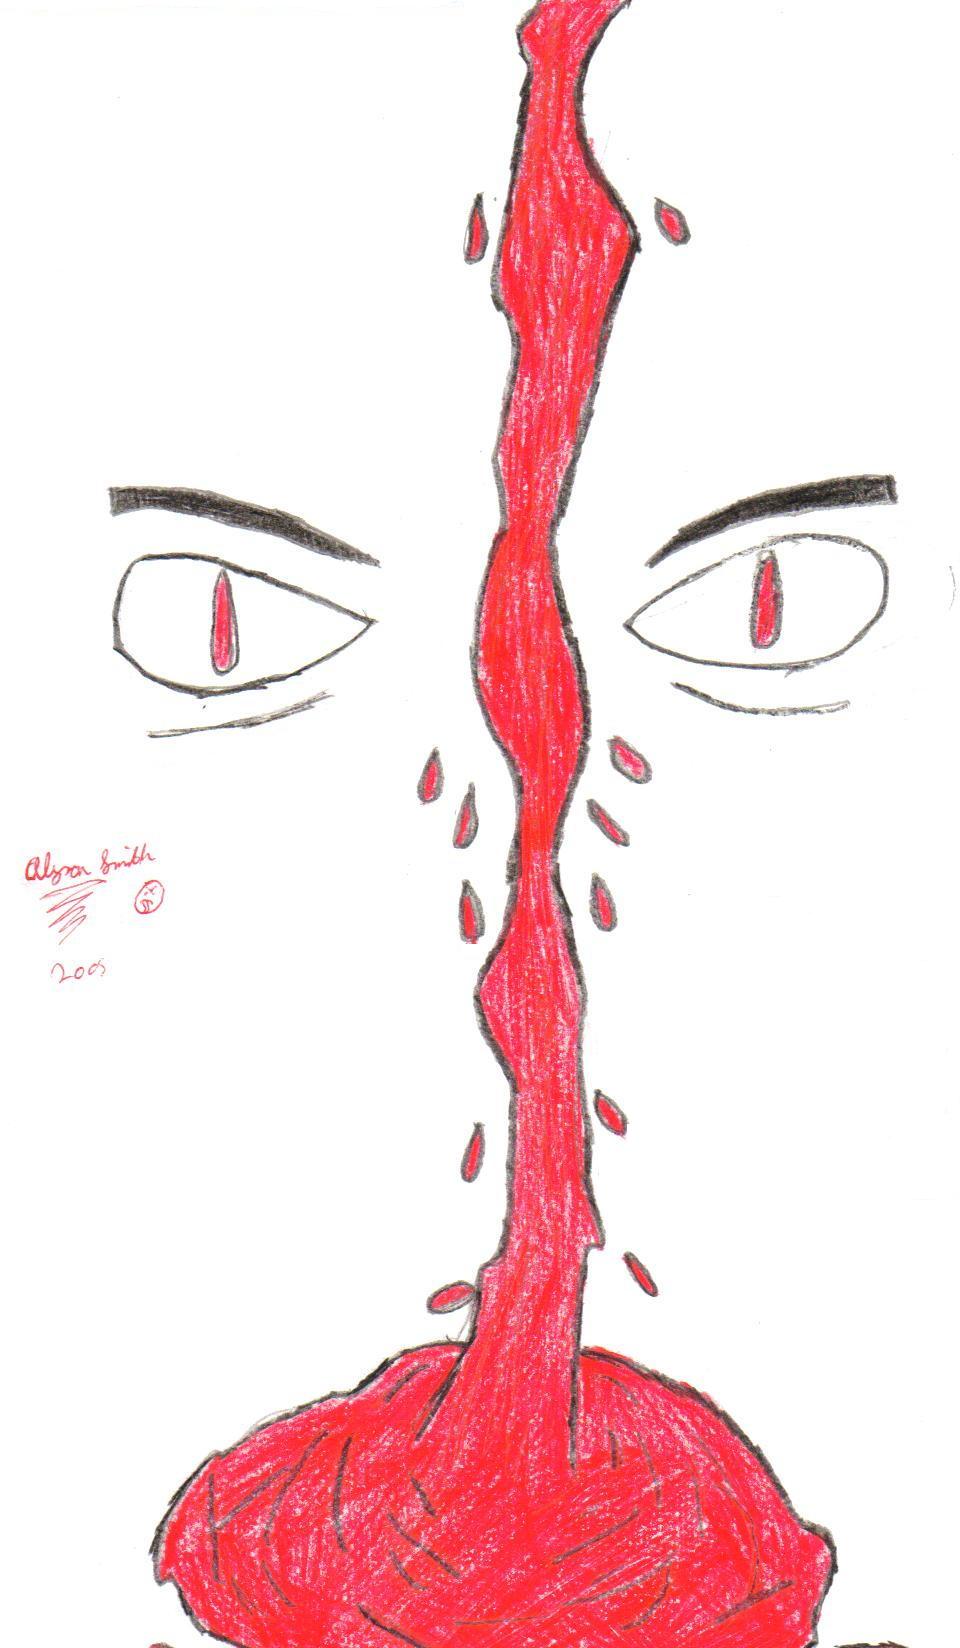 A Trickle Of Blood by ilovetodraw